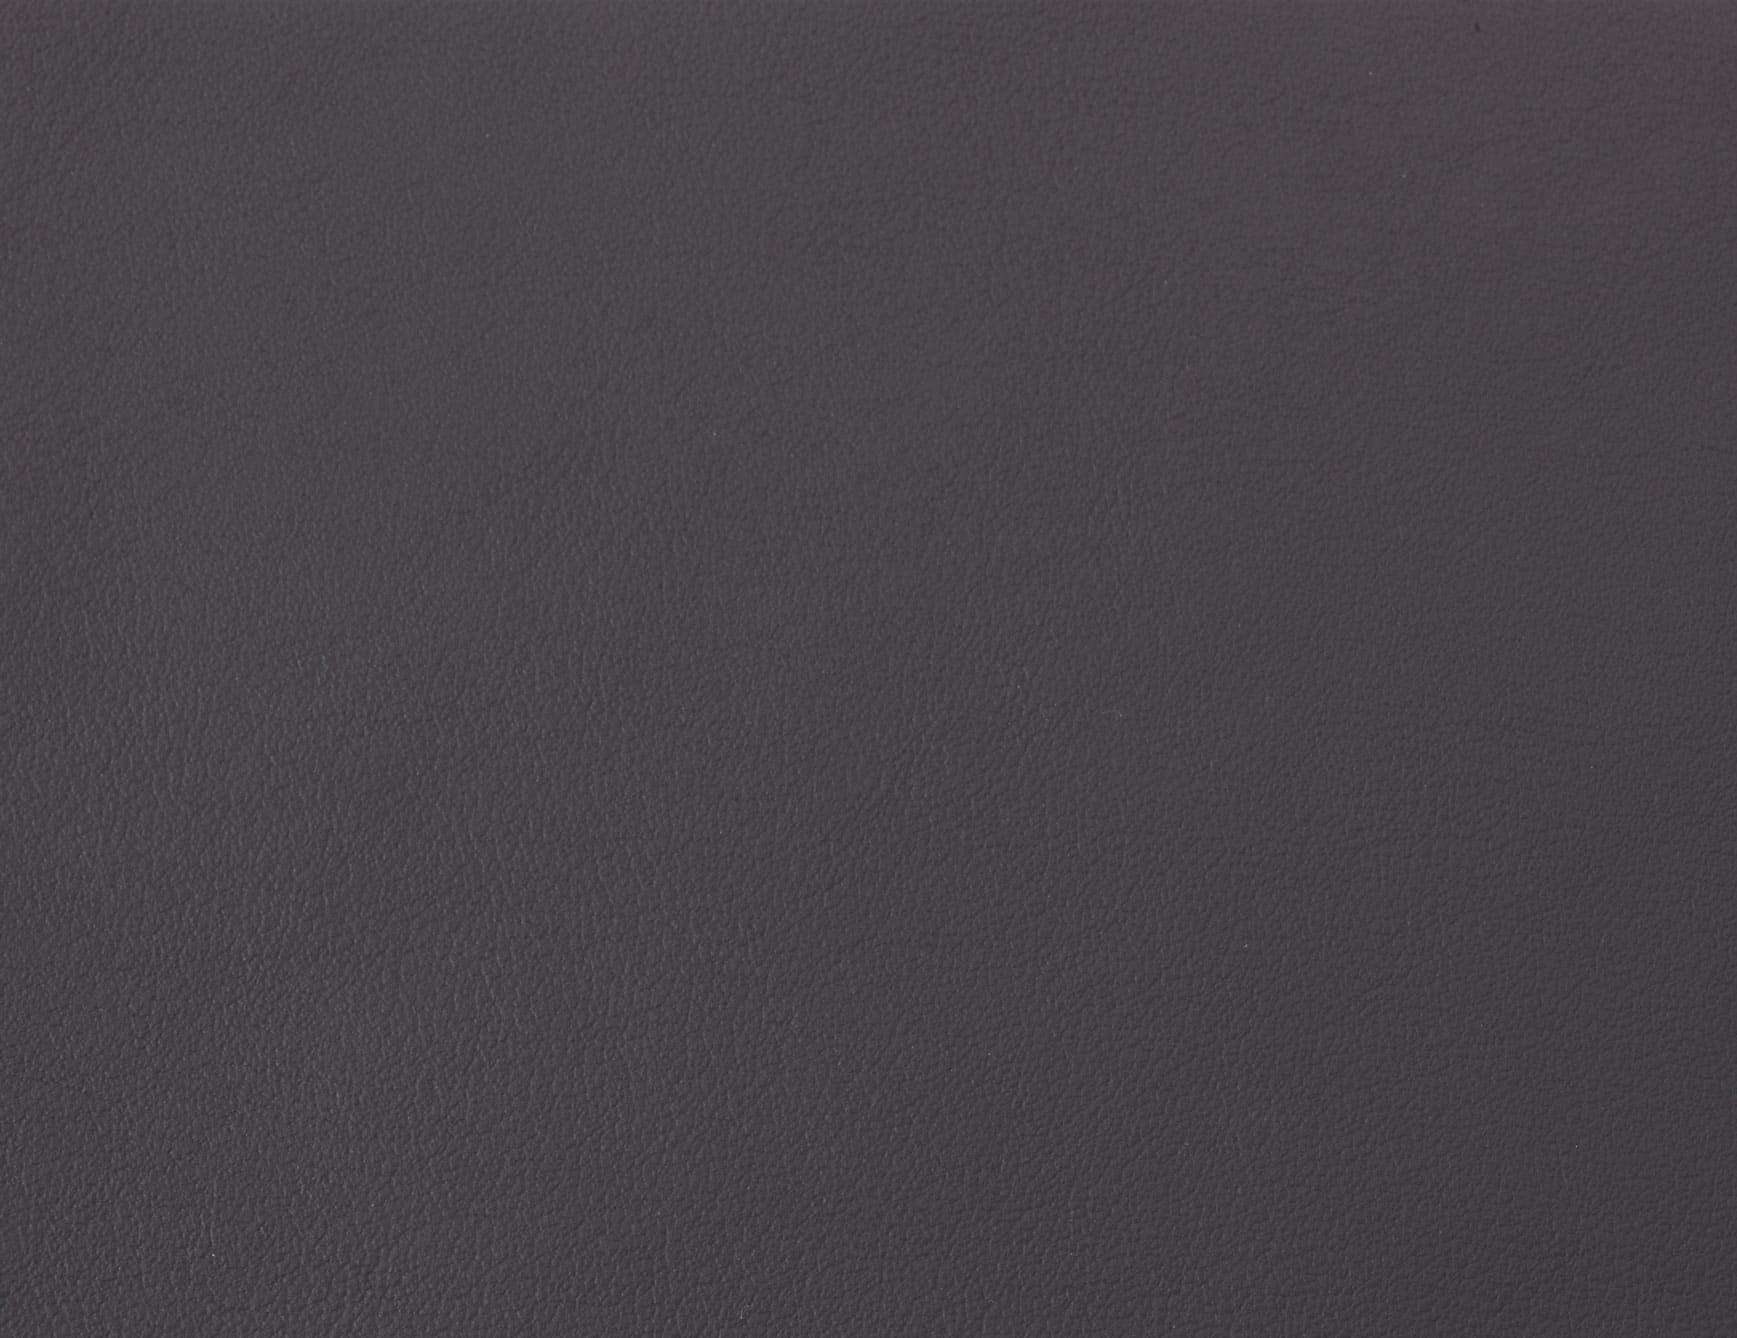 Antracite contemporary Italian upholstery leather in grey